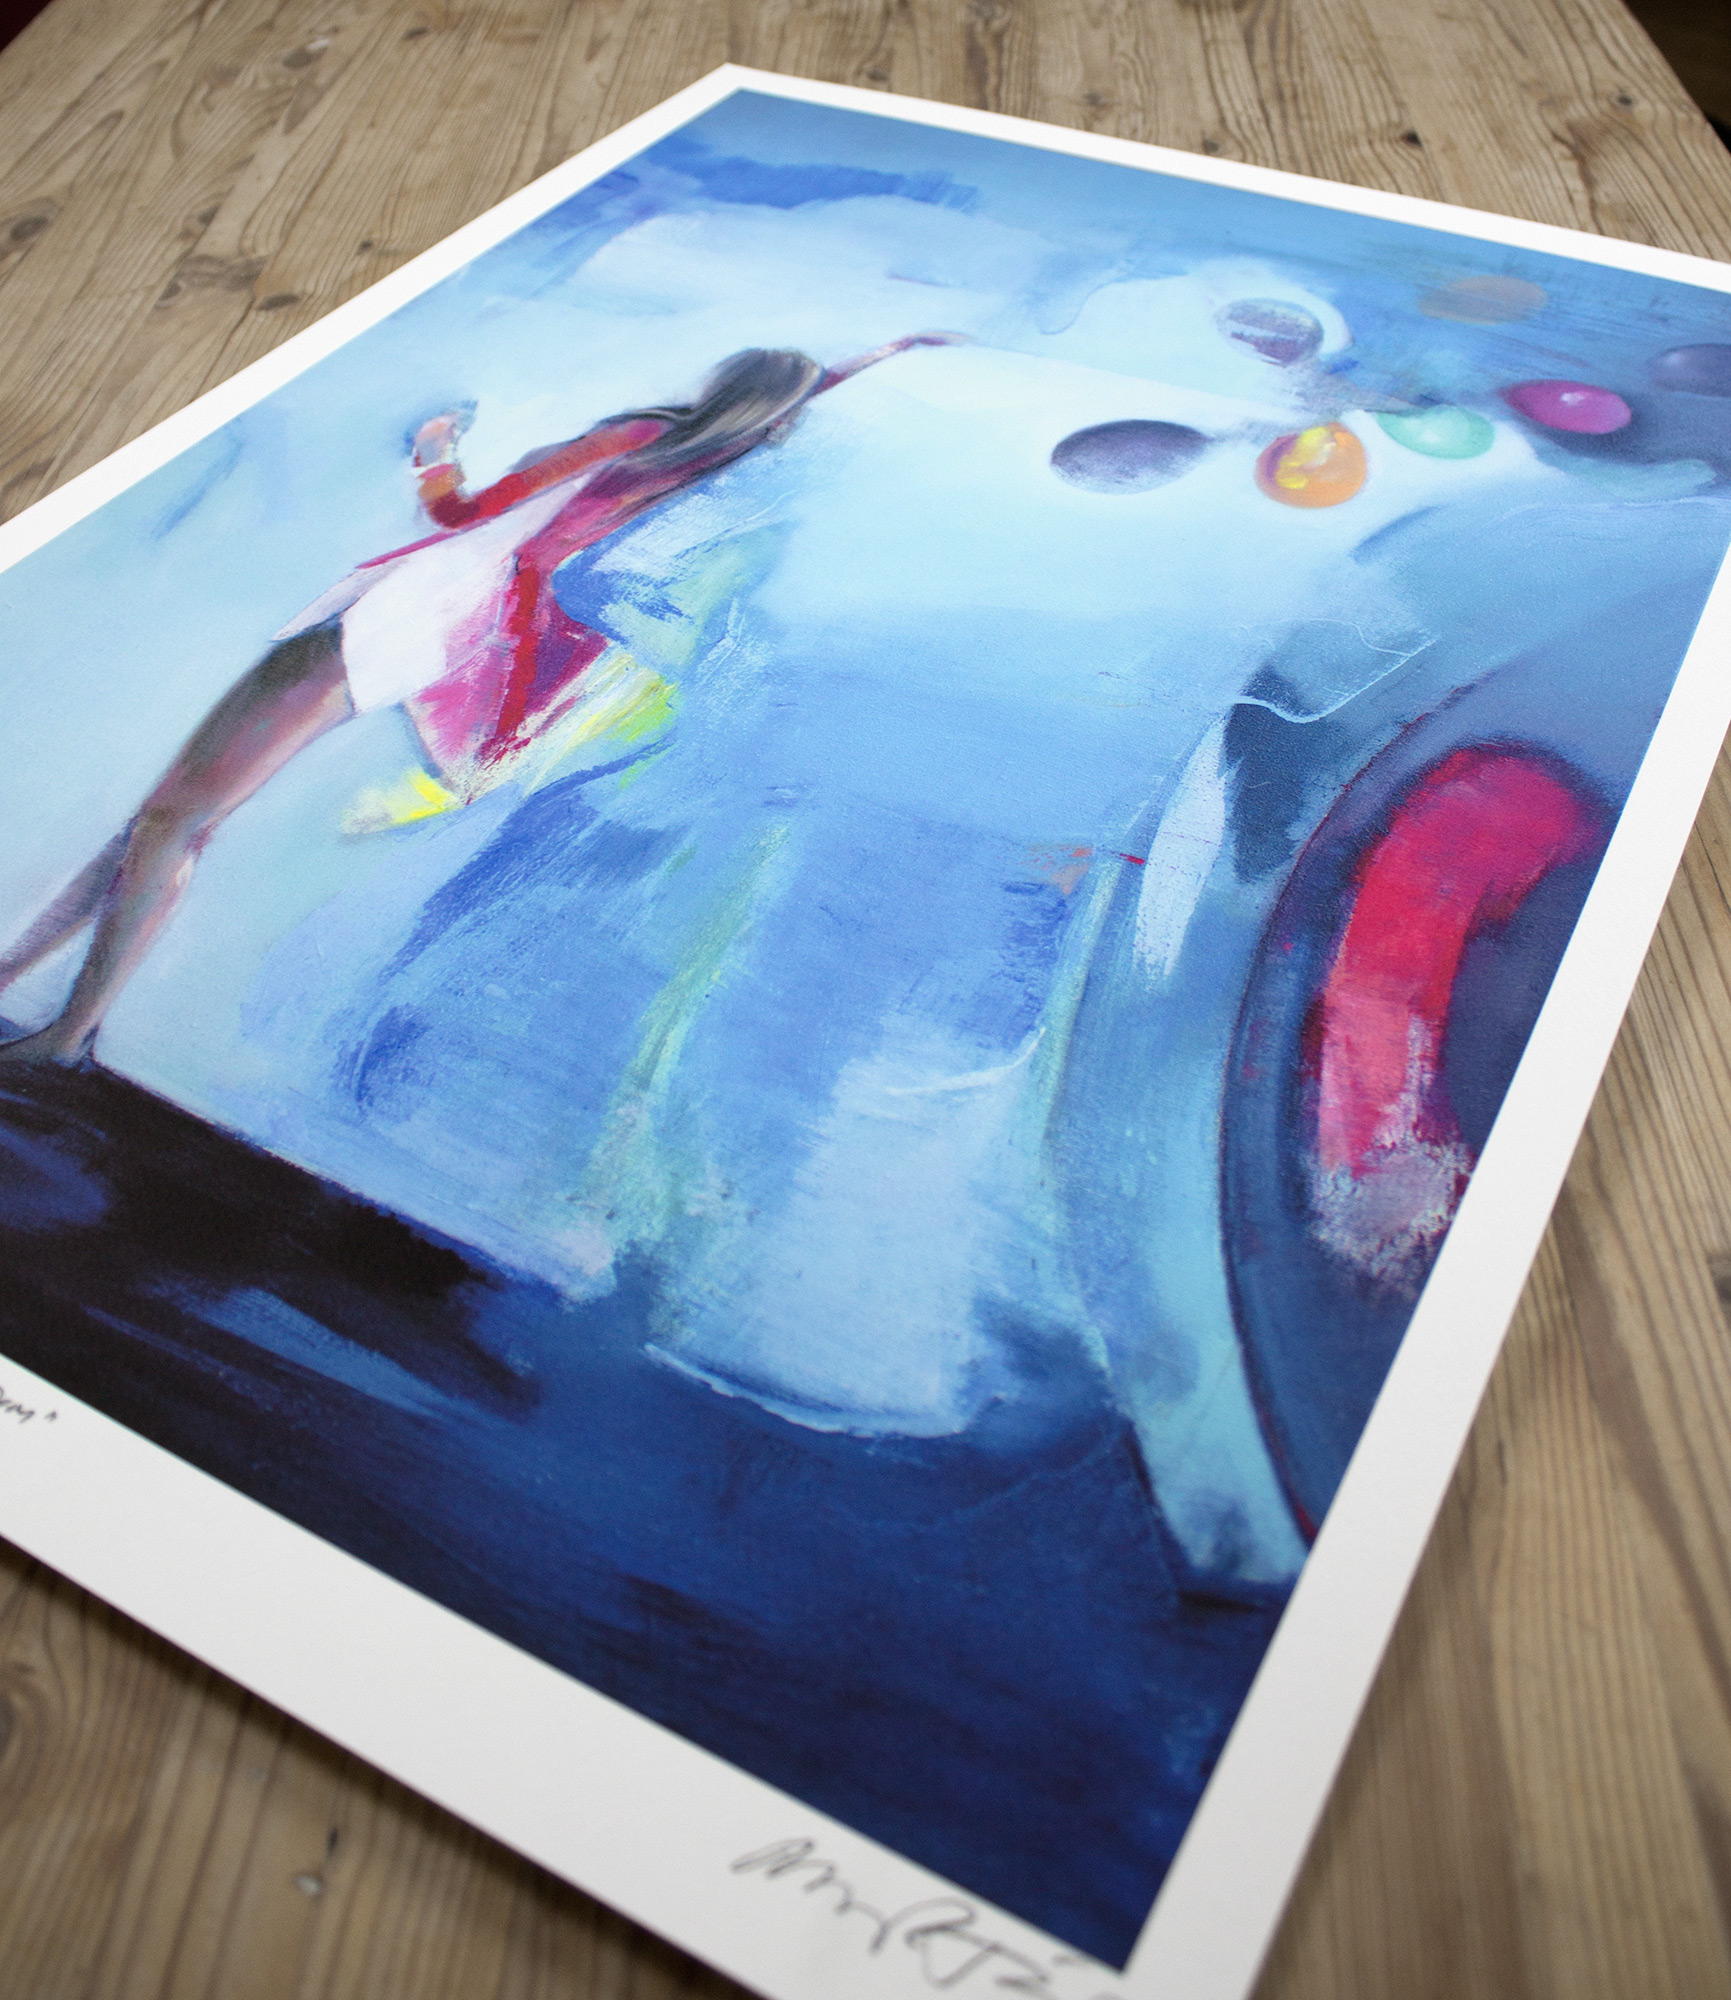 posters-prints, giclee-print, colorful, family-friendly, figurative, illustrative, pop, bodies, movement, people, sky, blue, red, paper, contemporary-art, danish, design, female, interior, interior-design, modern, modern-art, nordic, party, posters, scandinavien, women, Buy original high quality art. Paintings, drawings, limited edition prints & posters by talented artists.